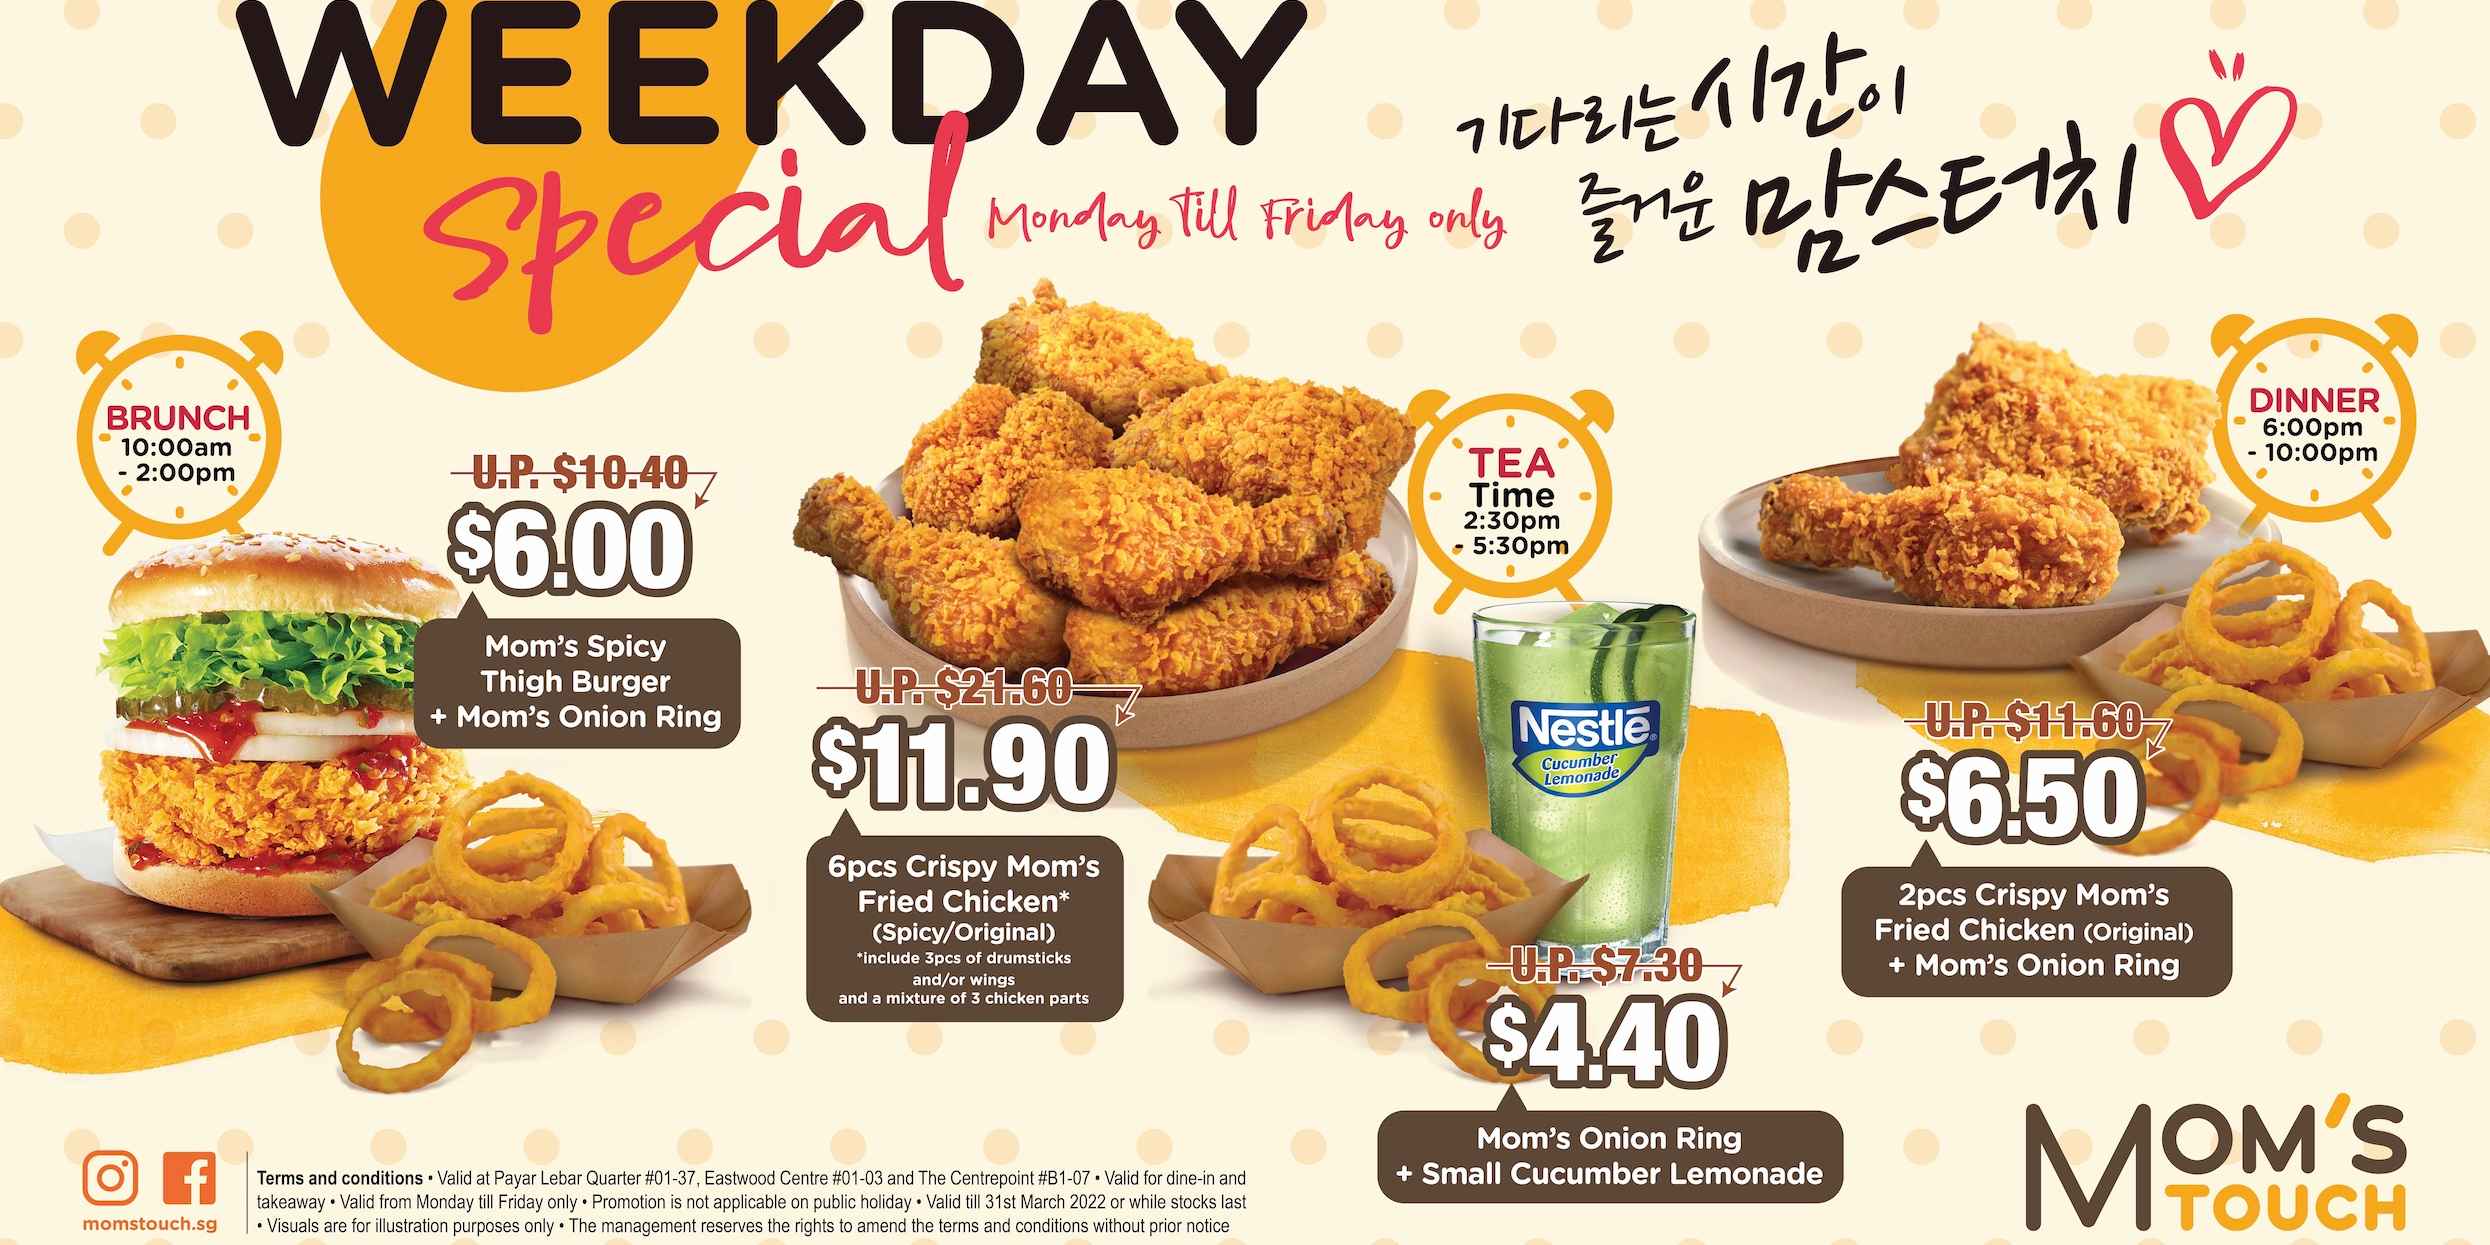 It’s Deal O’Clock at No.1 Korean Fast Food Chain, Mom’s Touch – Up To 45% OFF! (Until 31 March 2022)